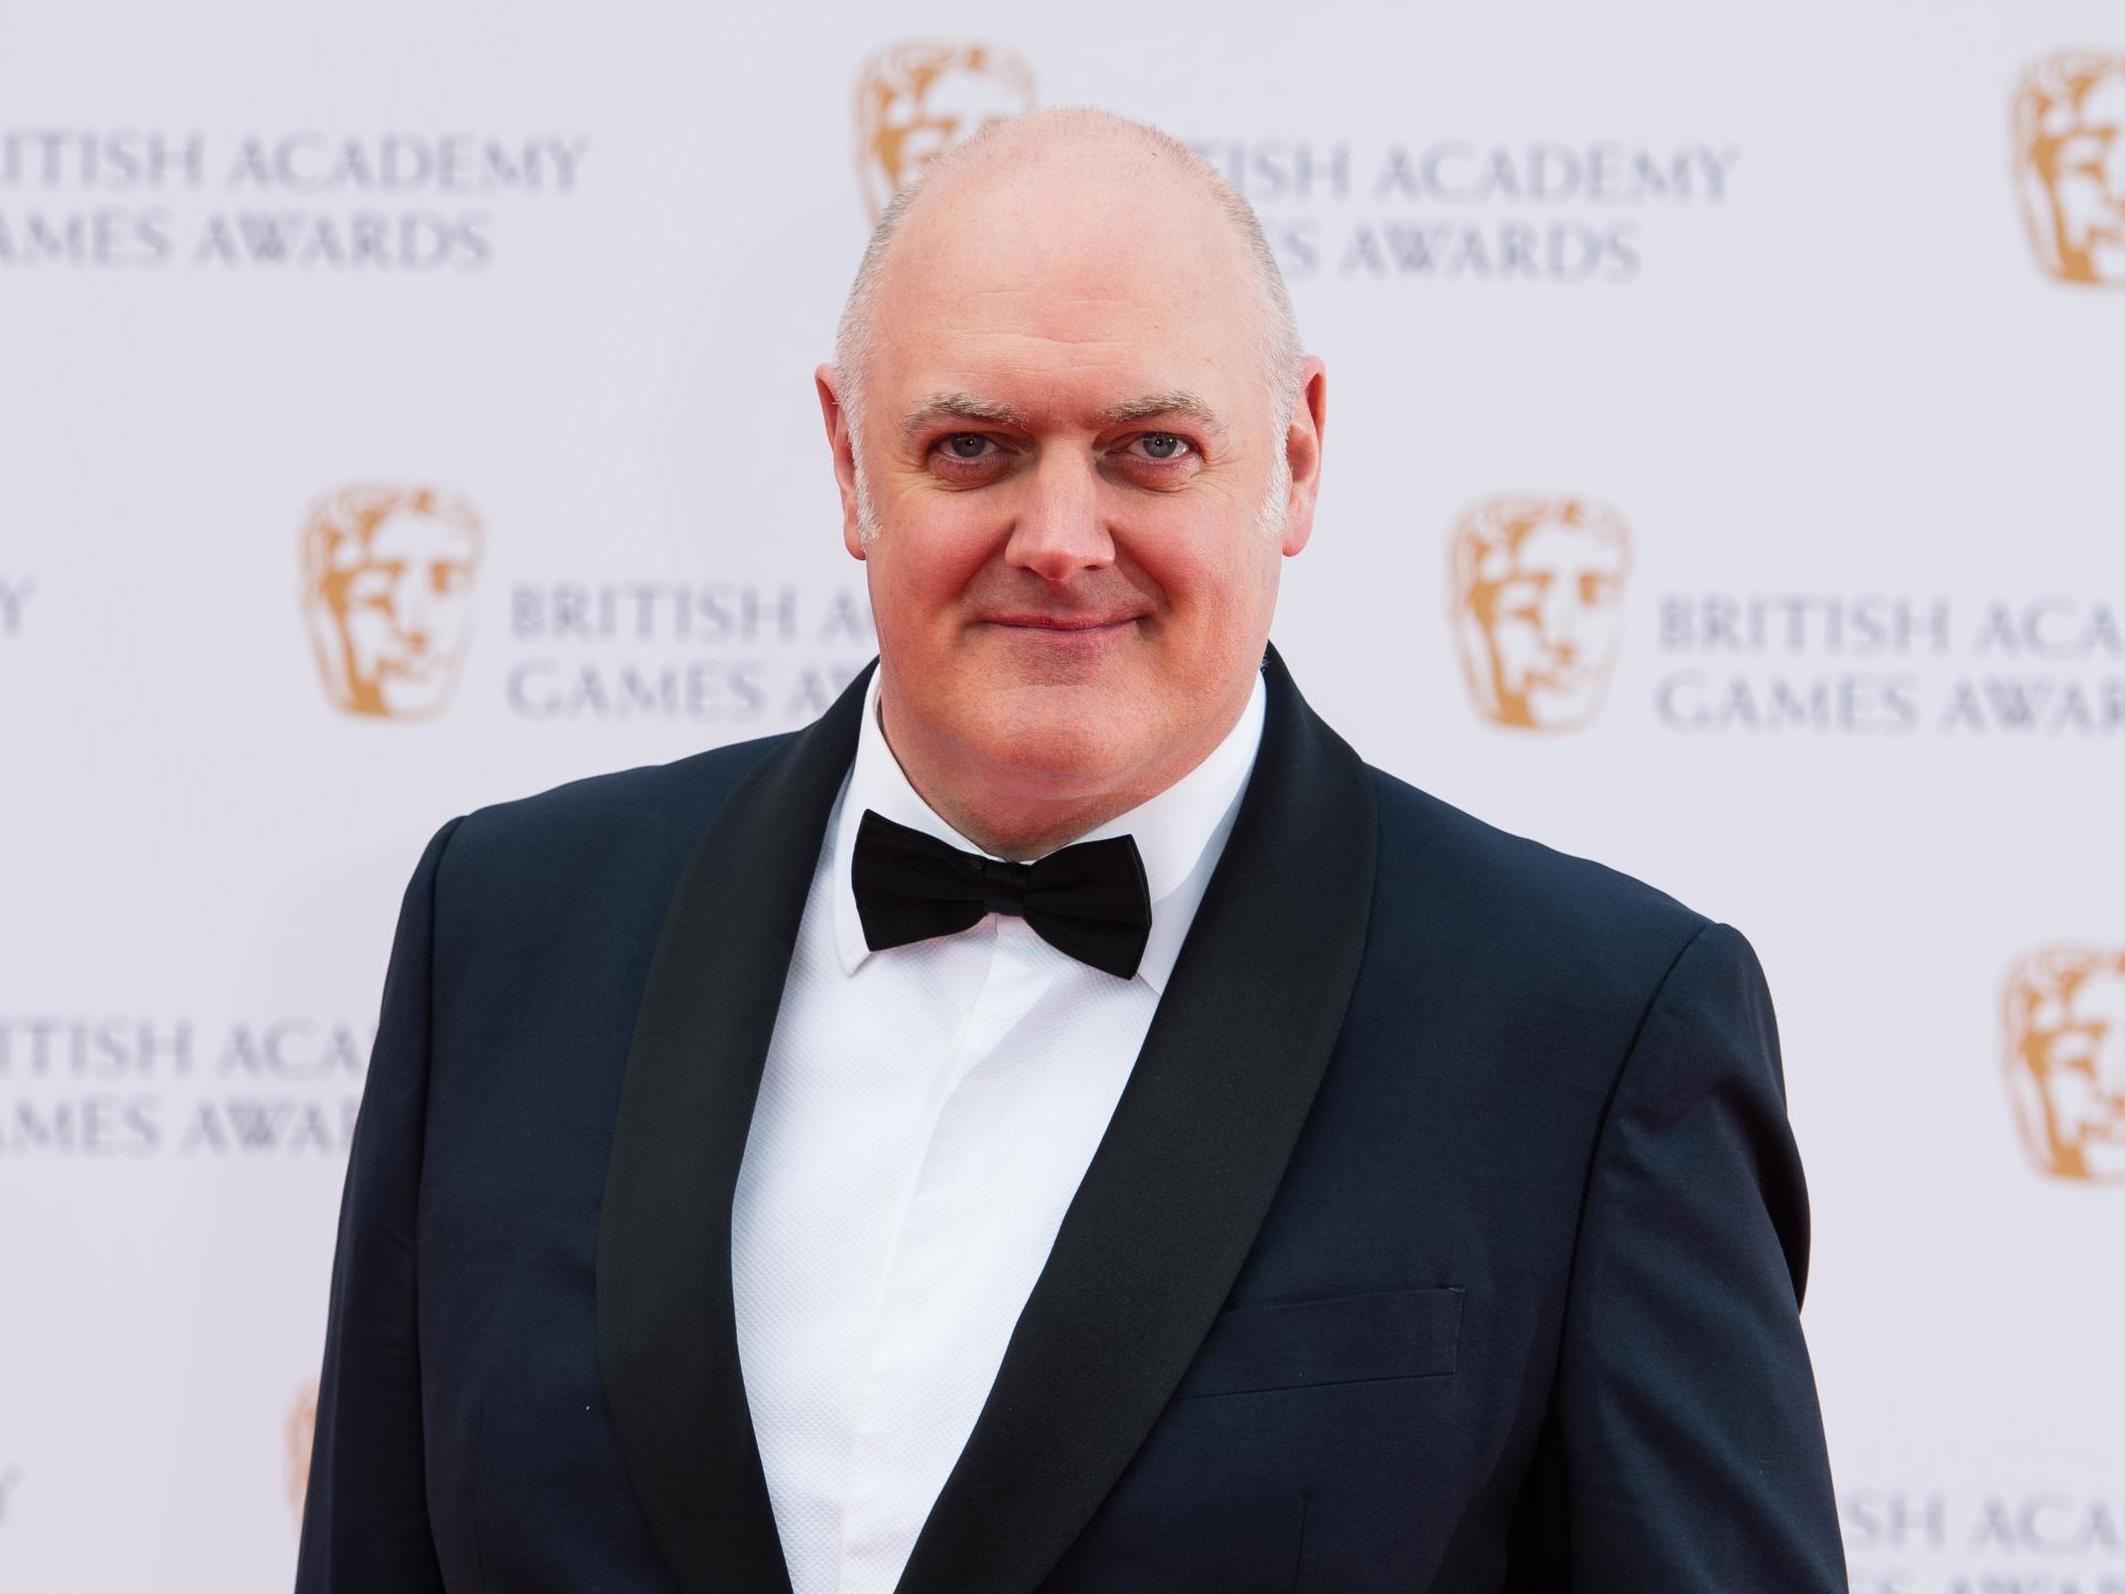 O Briain says finding his birth certificate was an emotional moment